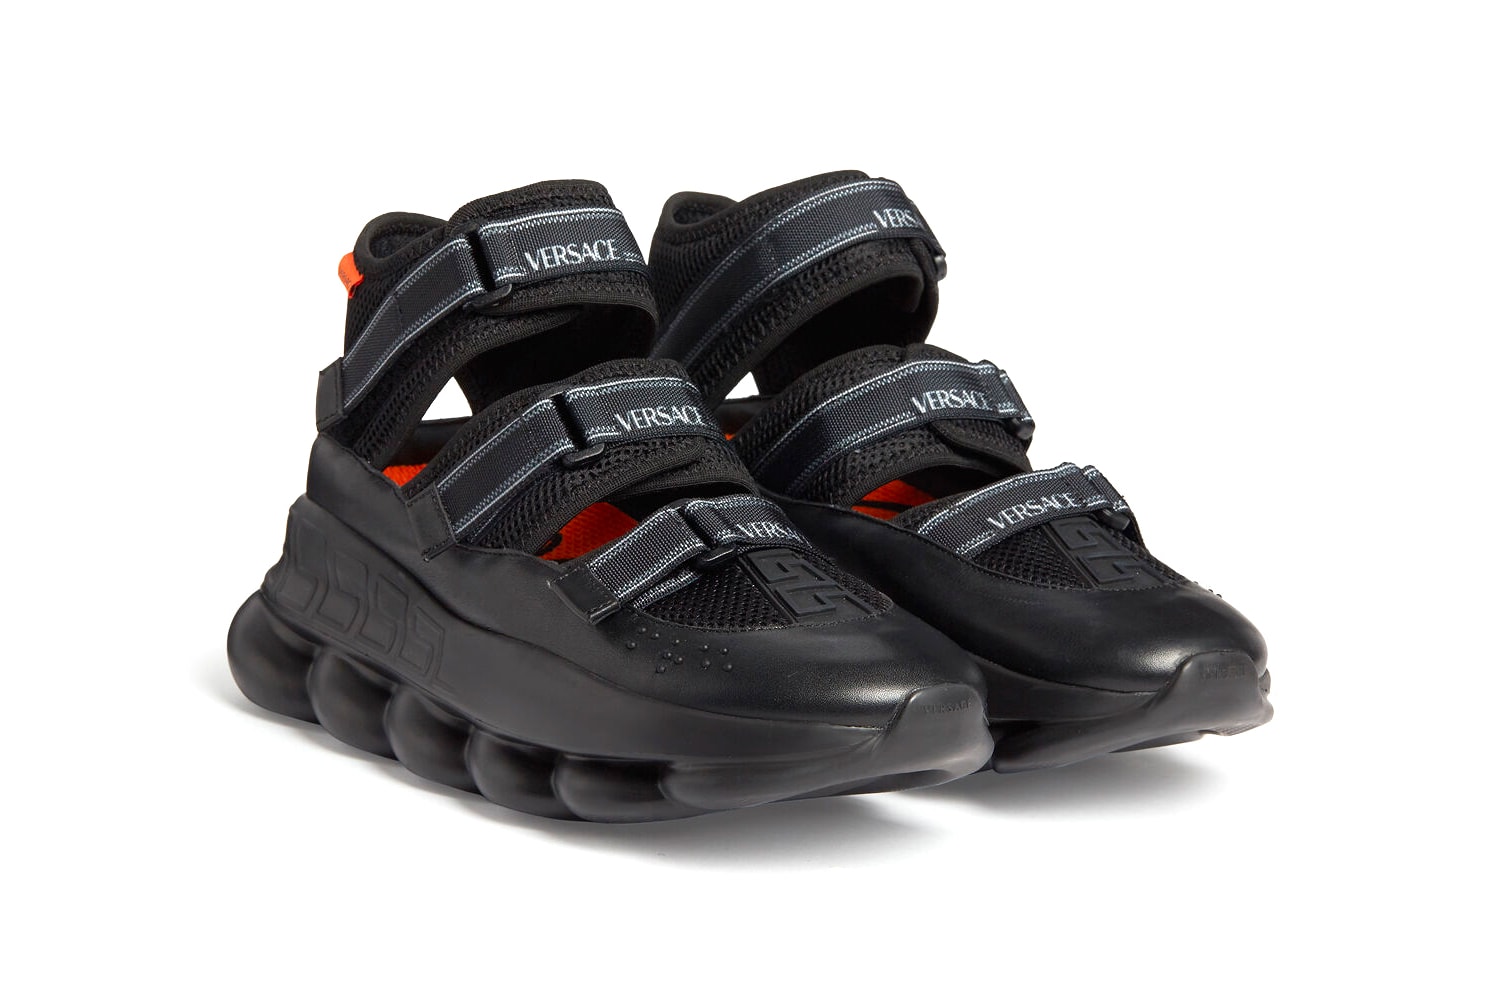 Versace Chain Reaction Sandals Release Info drop date price Chain-linked sole Greca outsole Braille lettering Logo hook and loop straps made in italy DSU8006-D24TG_D41 where to cop 